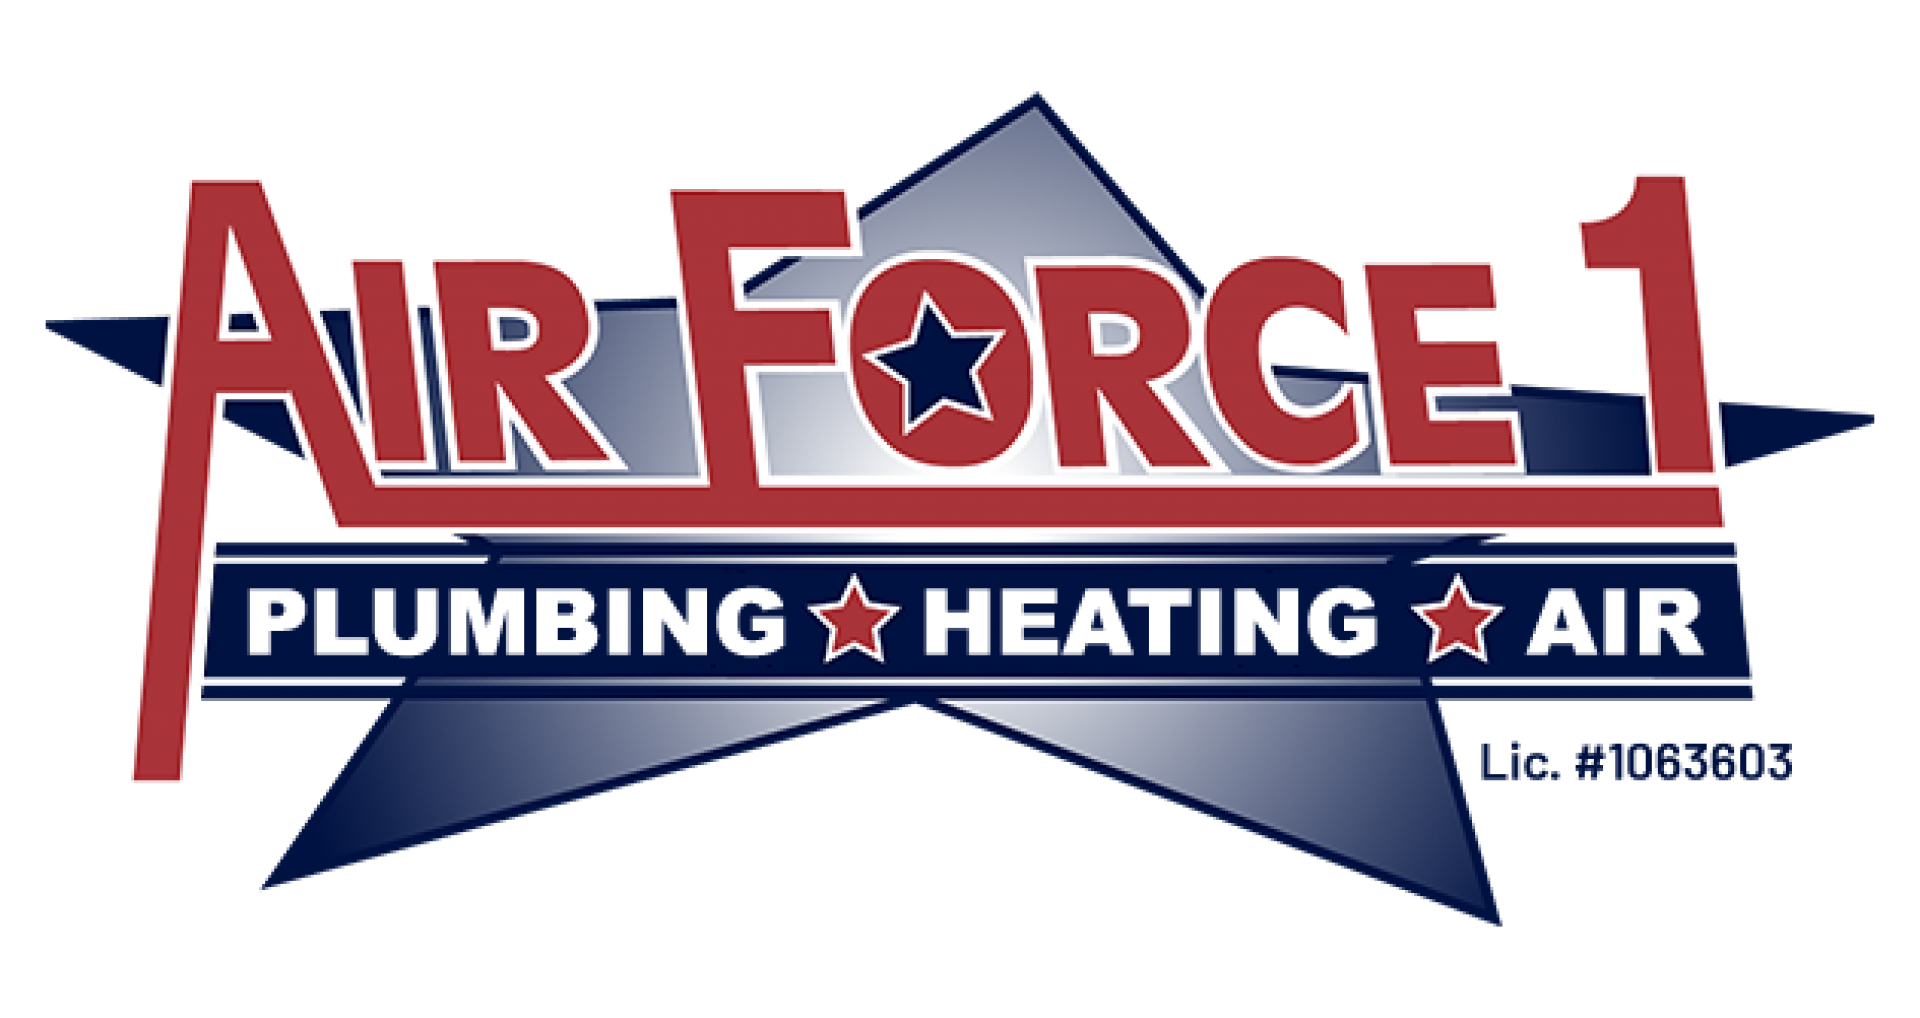 AirForce1 Plumbing, Heating and Air Logo